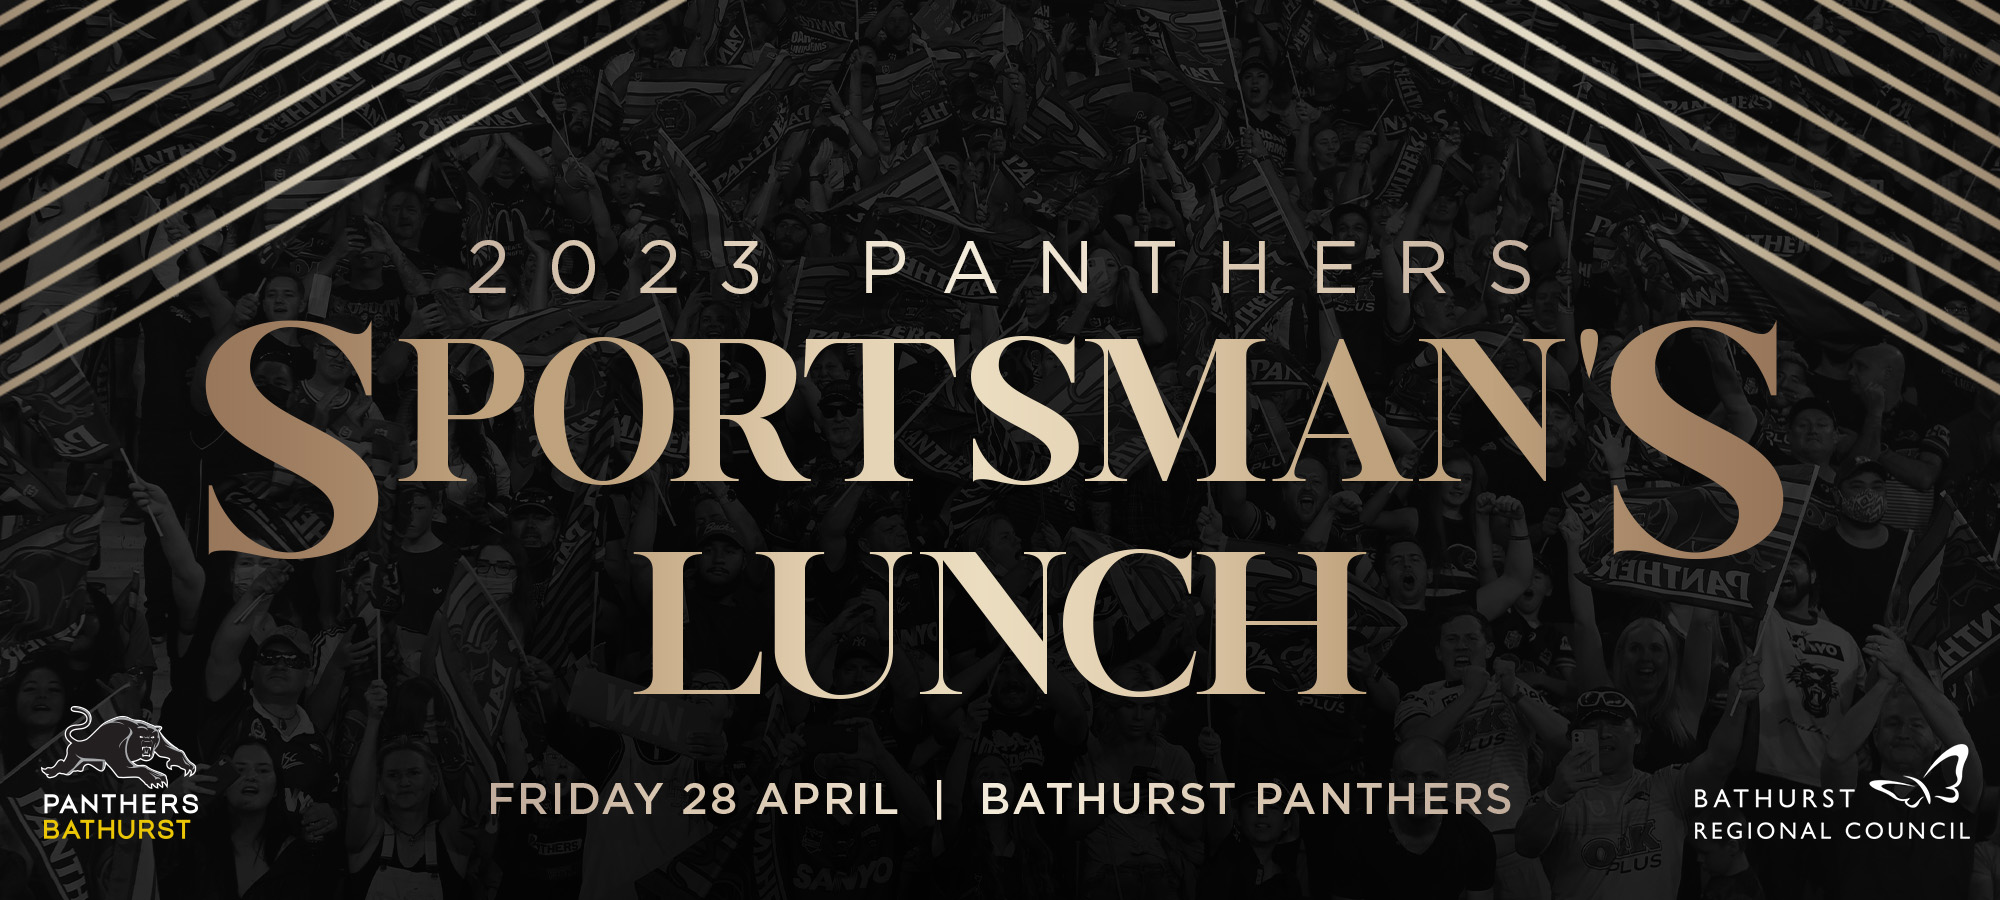 2023 Panthers Sportsman’s Lunch